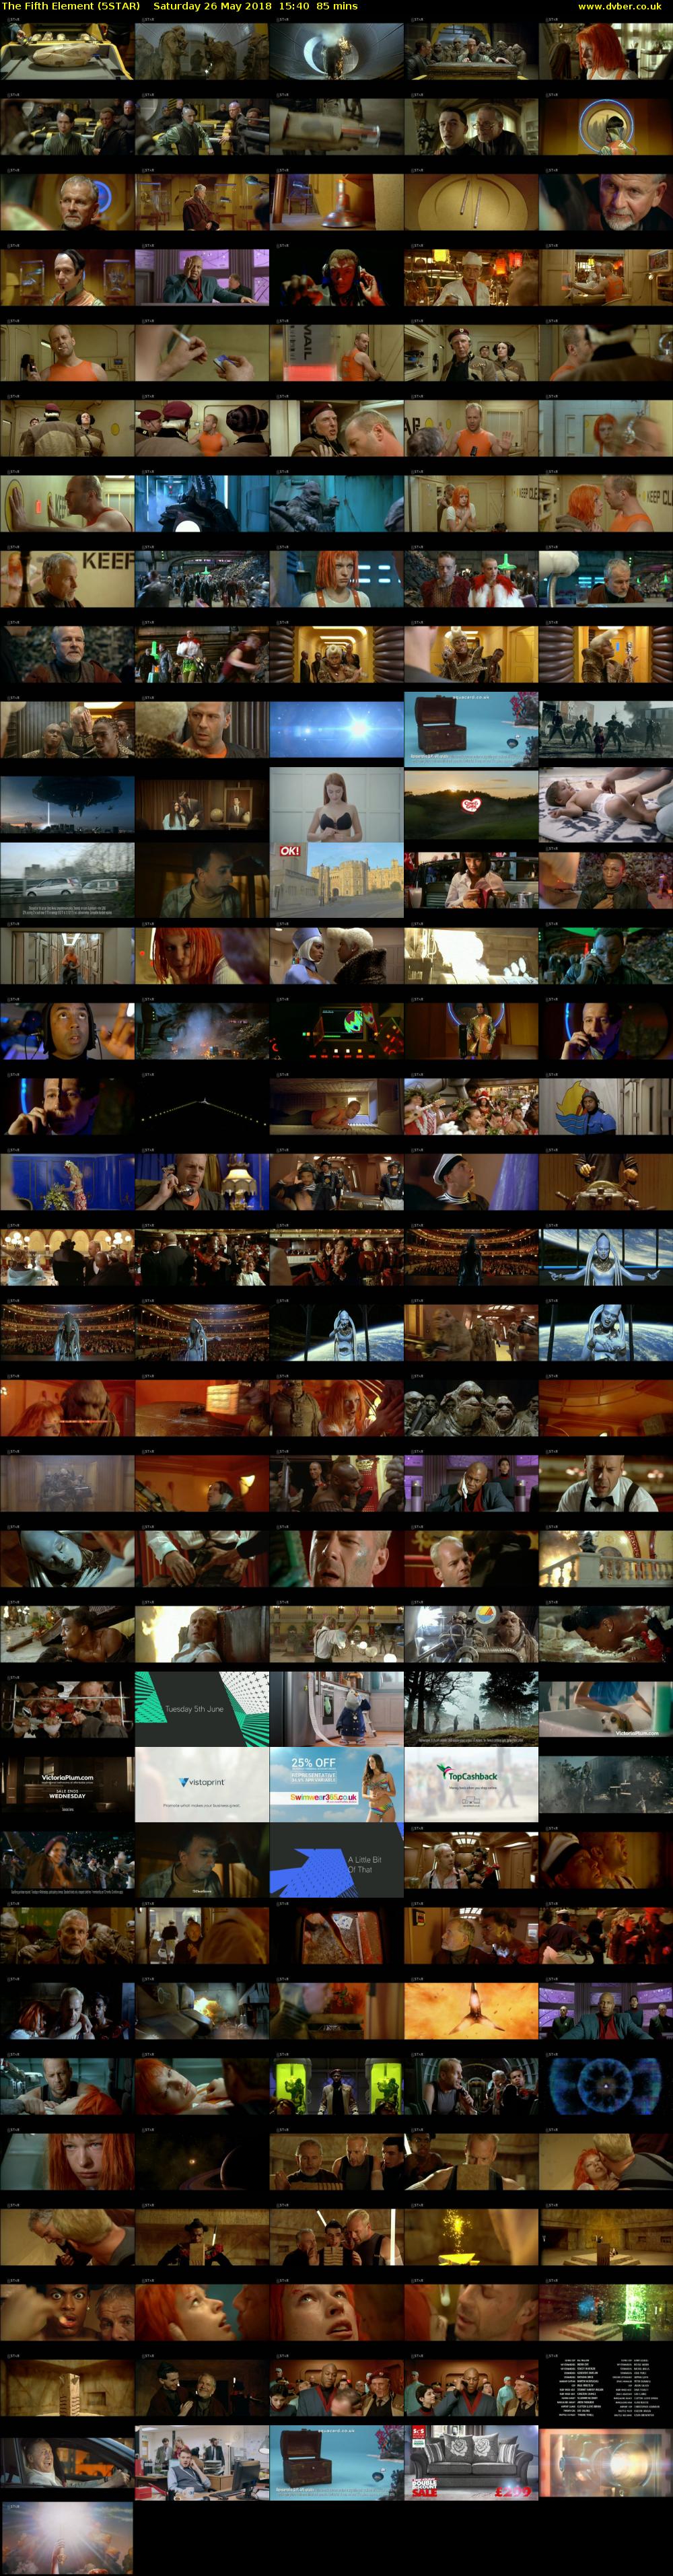 The Fifth Element (5STAR) Saturday 26 May 2018 15:40 - 17:05